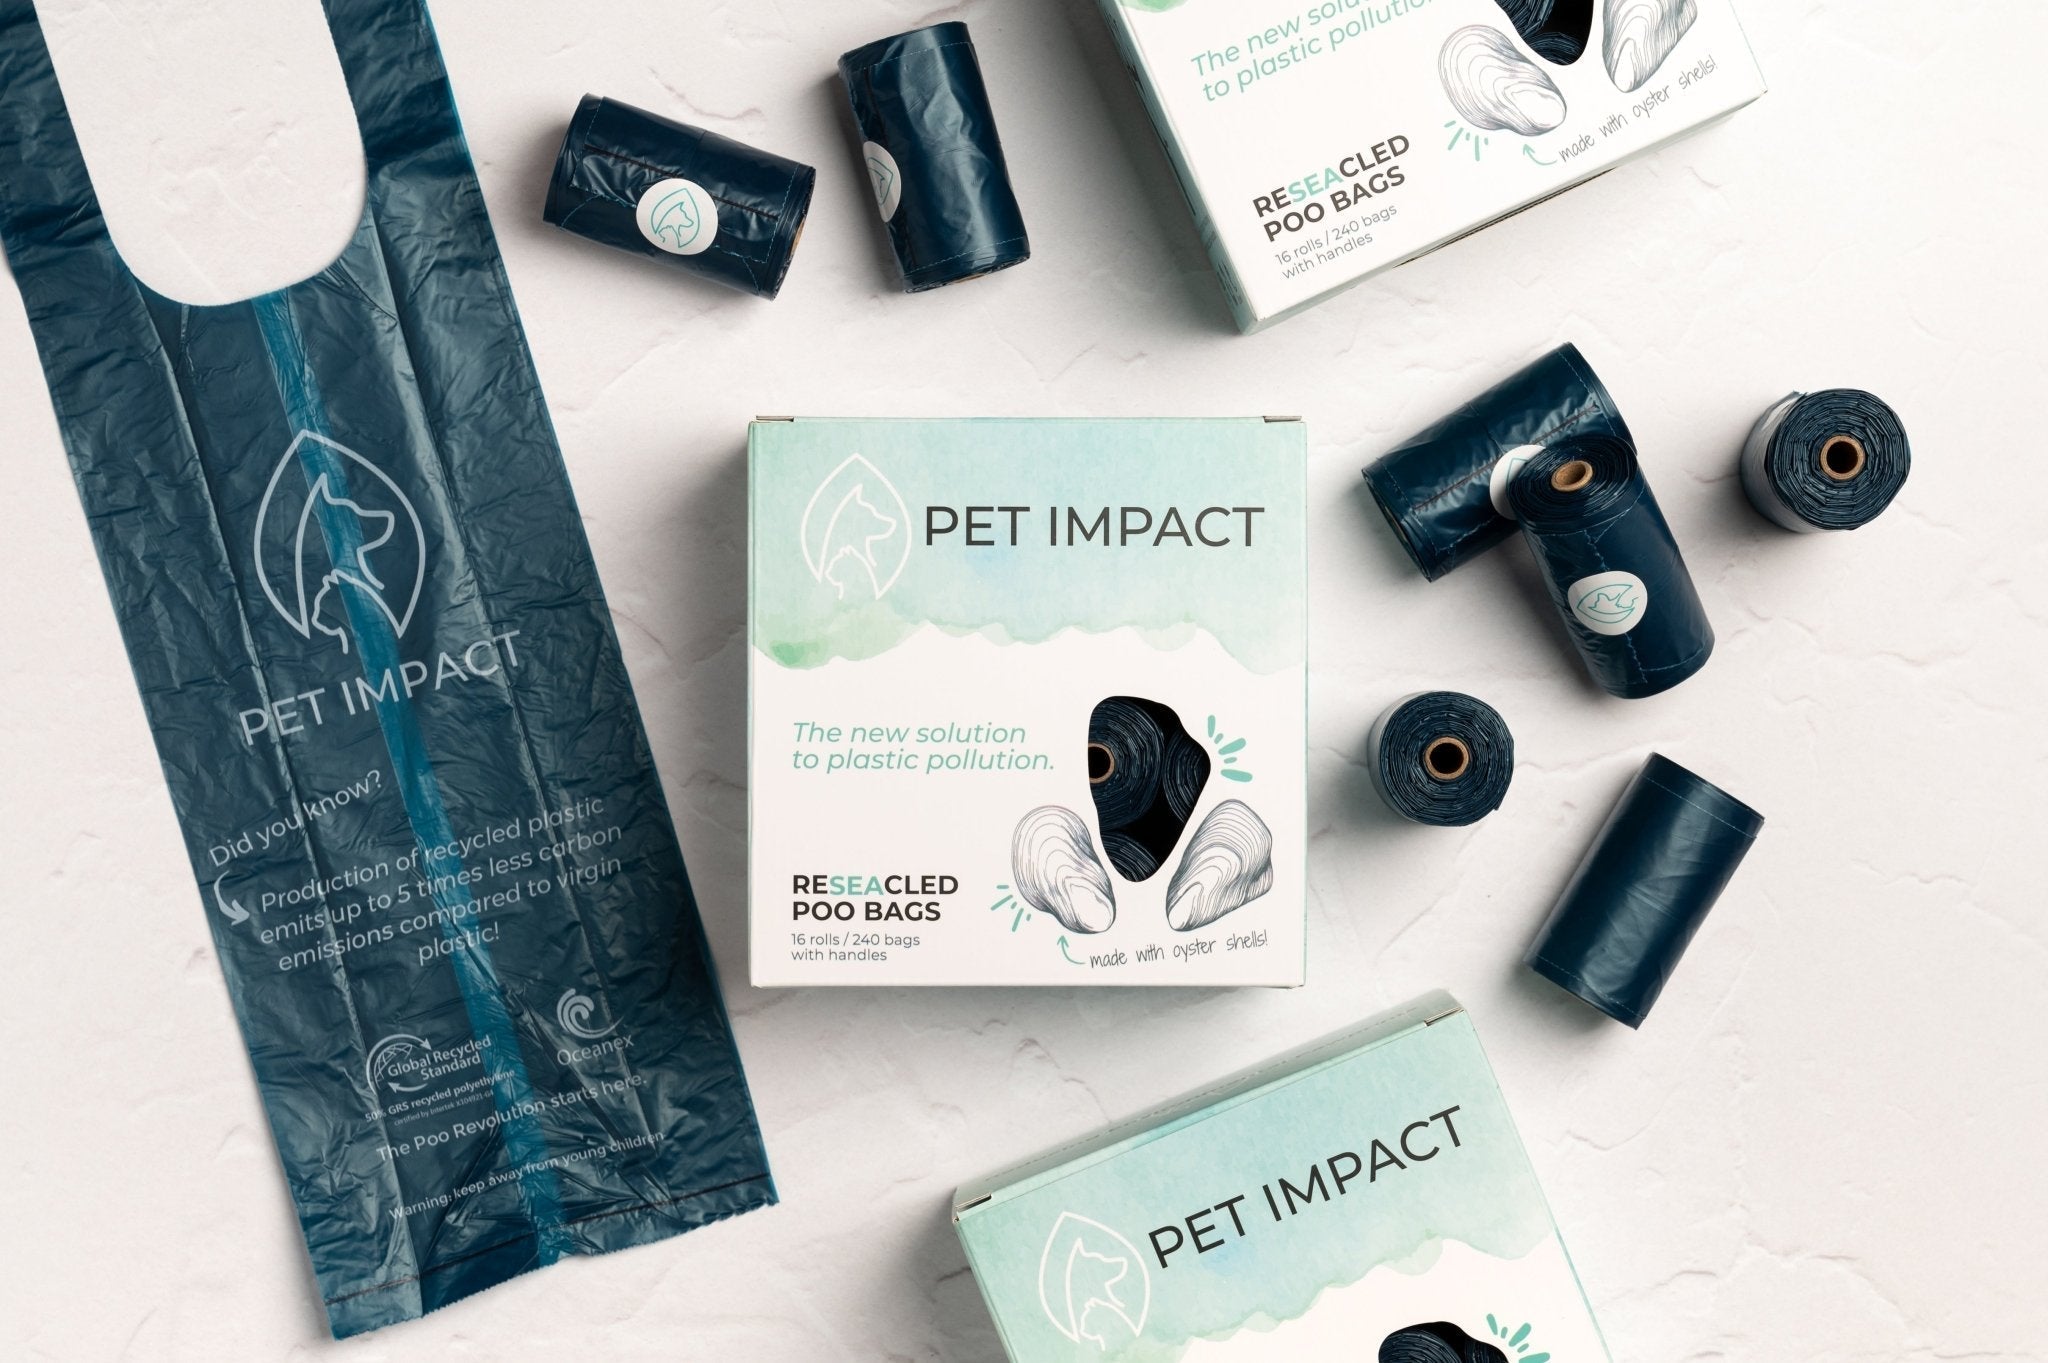 An image showcasing Pet Impact's ReSEAcled poo bags on a white background